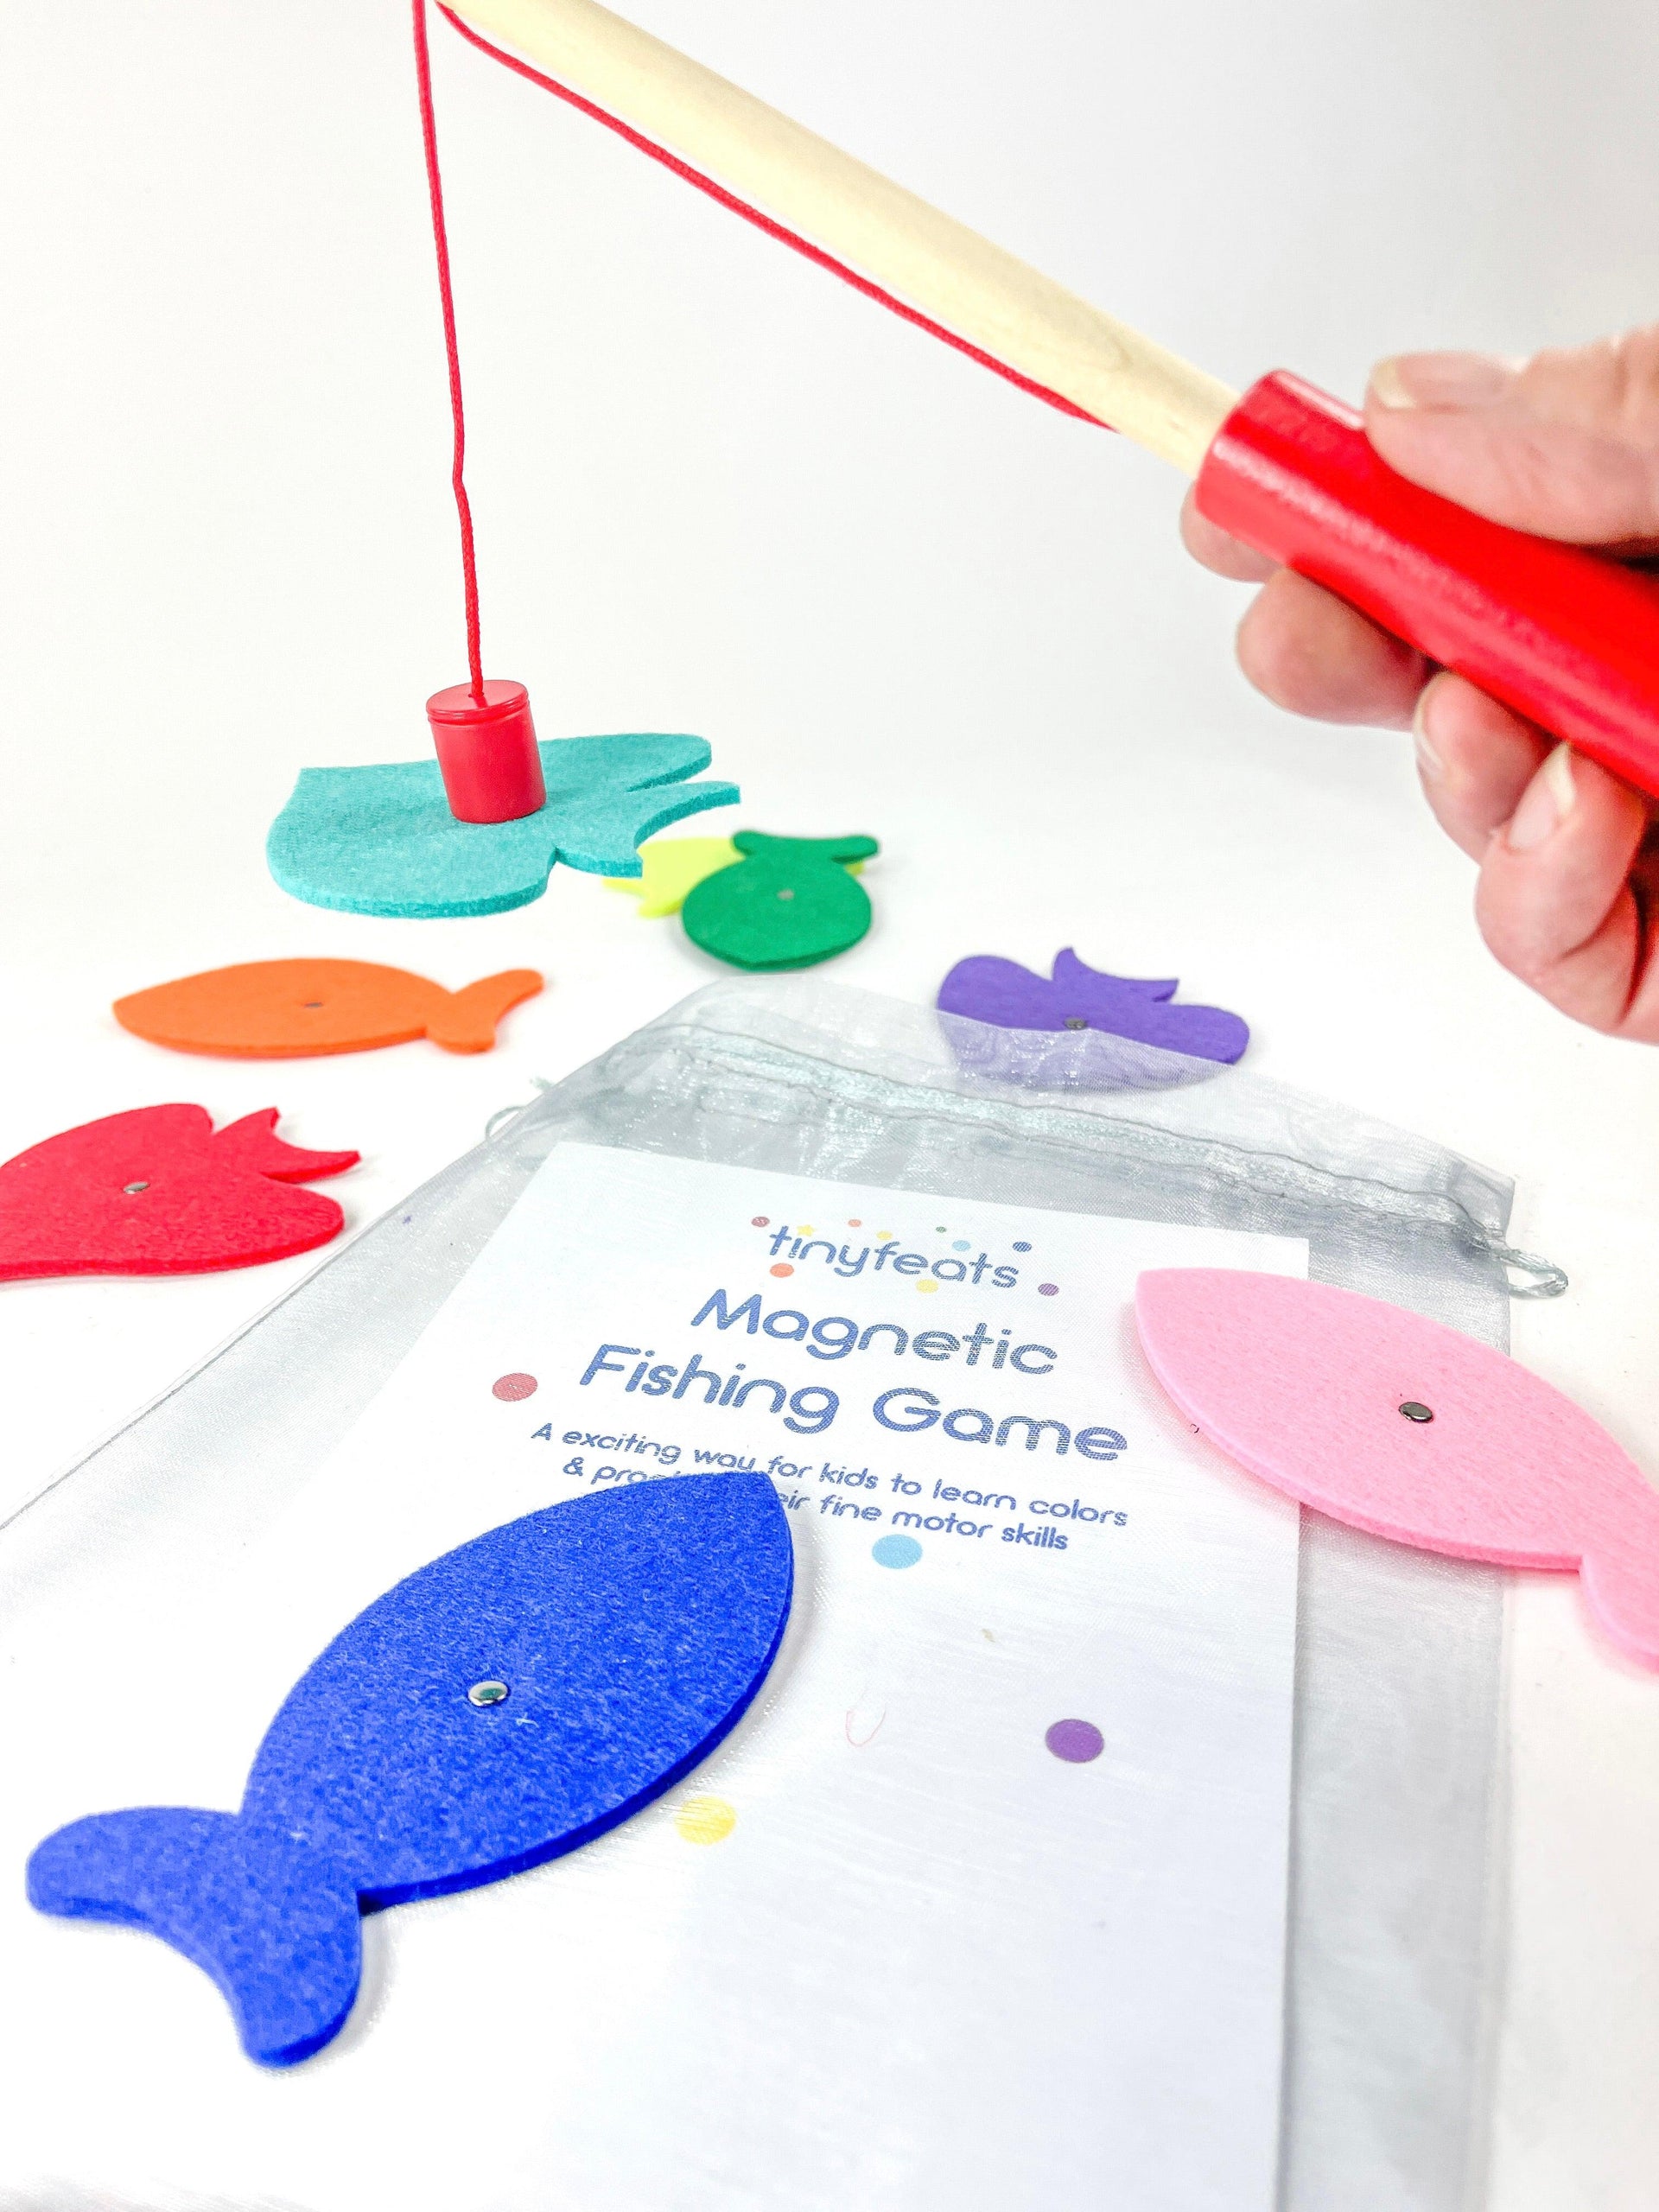 Introducing the tinyFEATs Magnetic Fishing Game for Kids! – tinyfeats